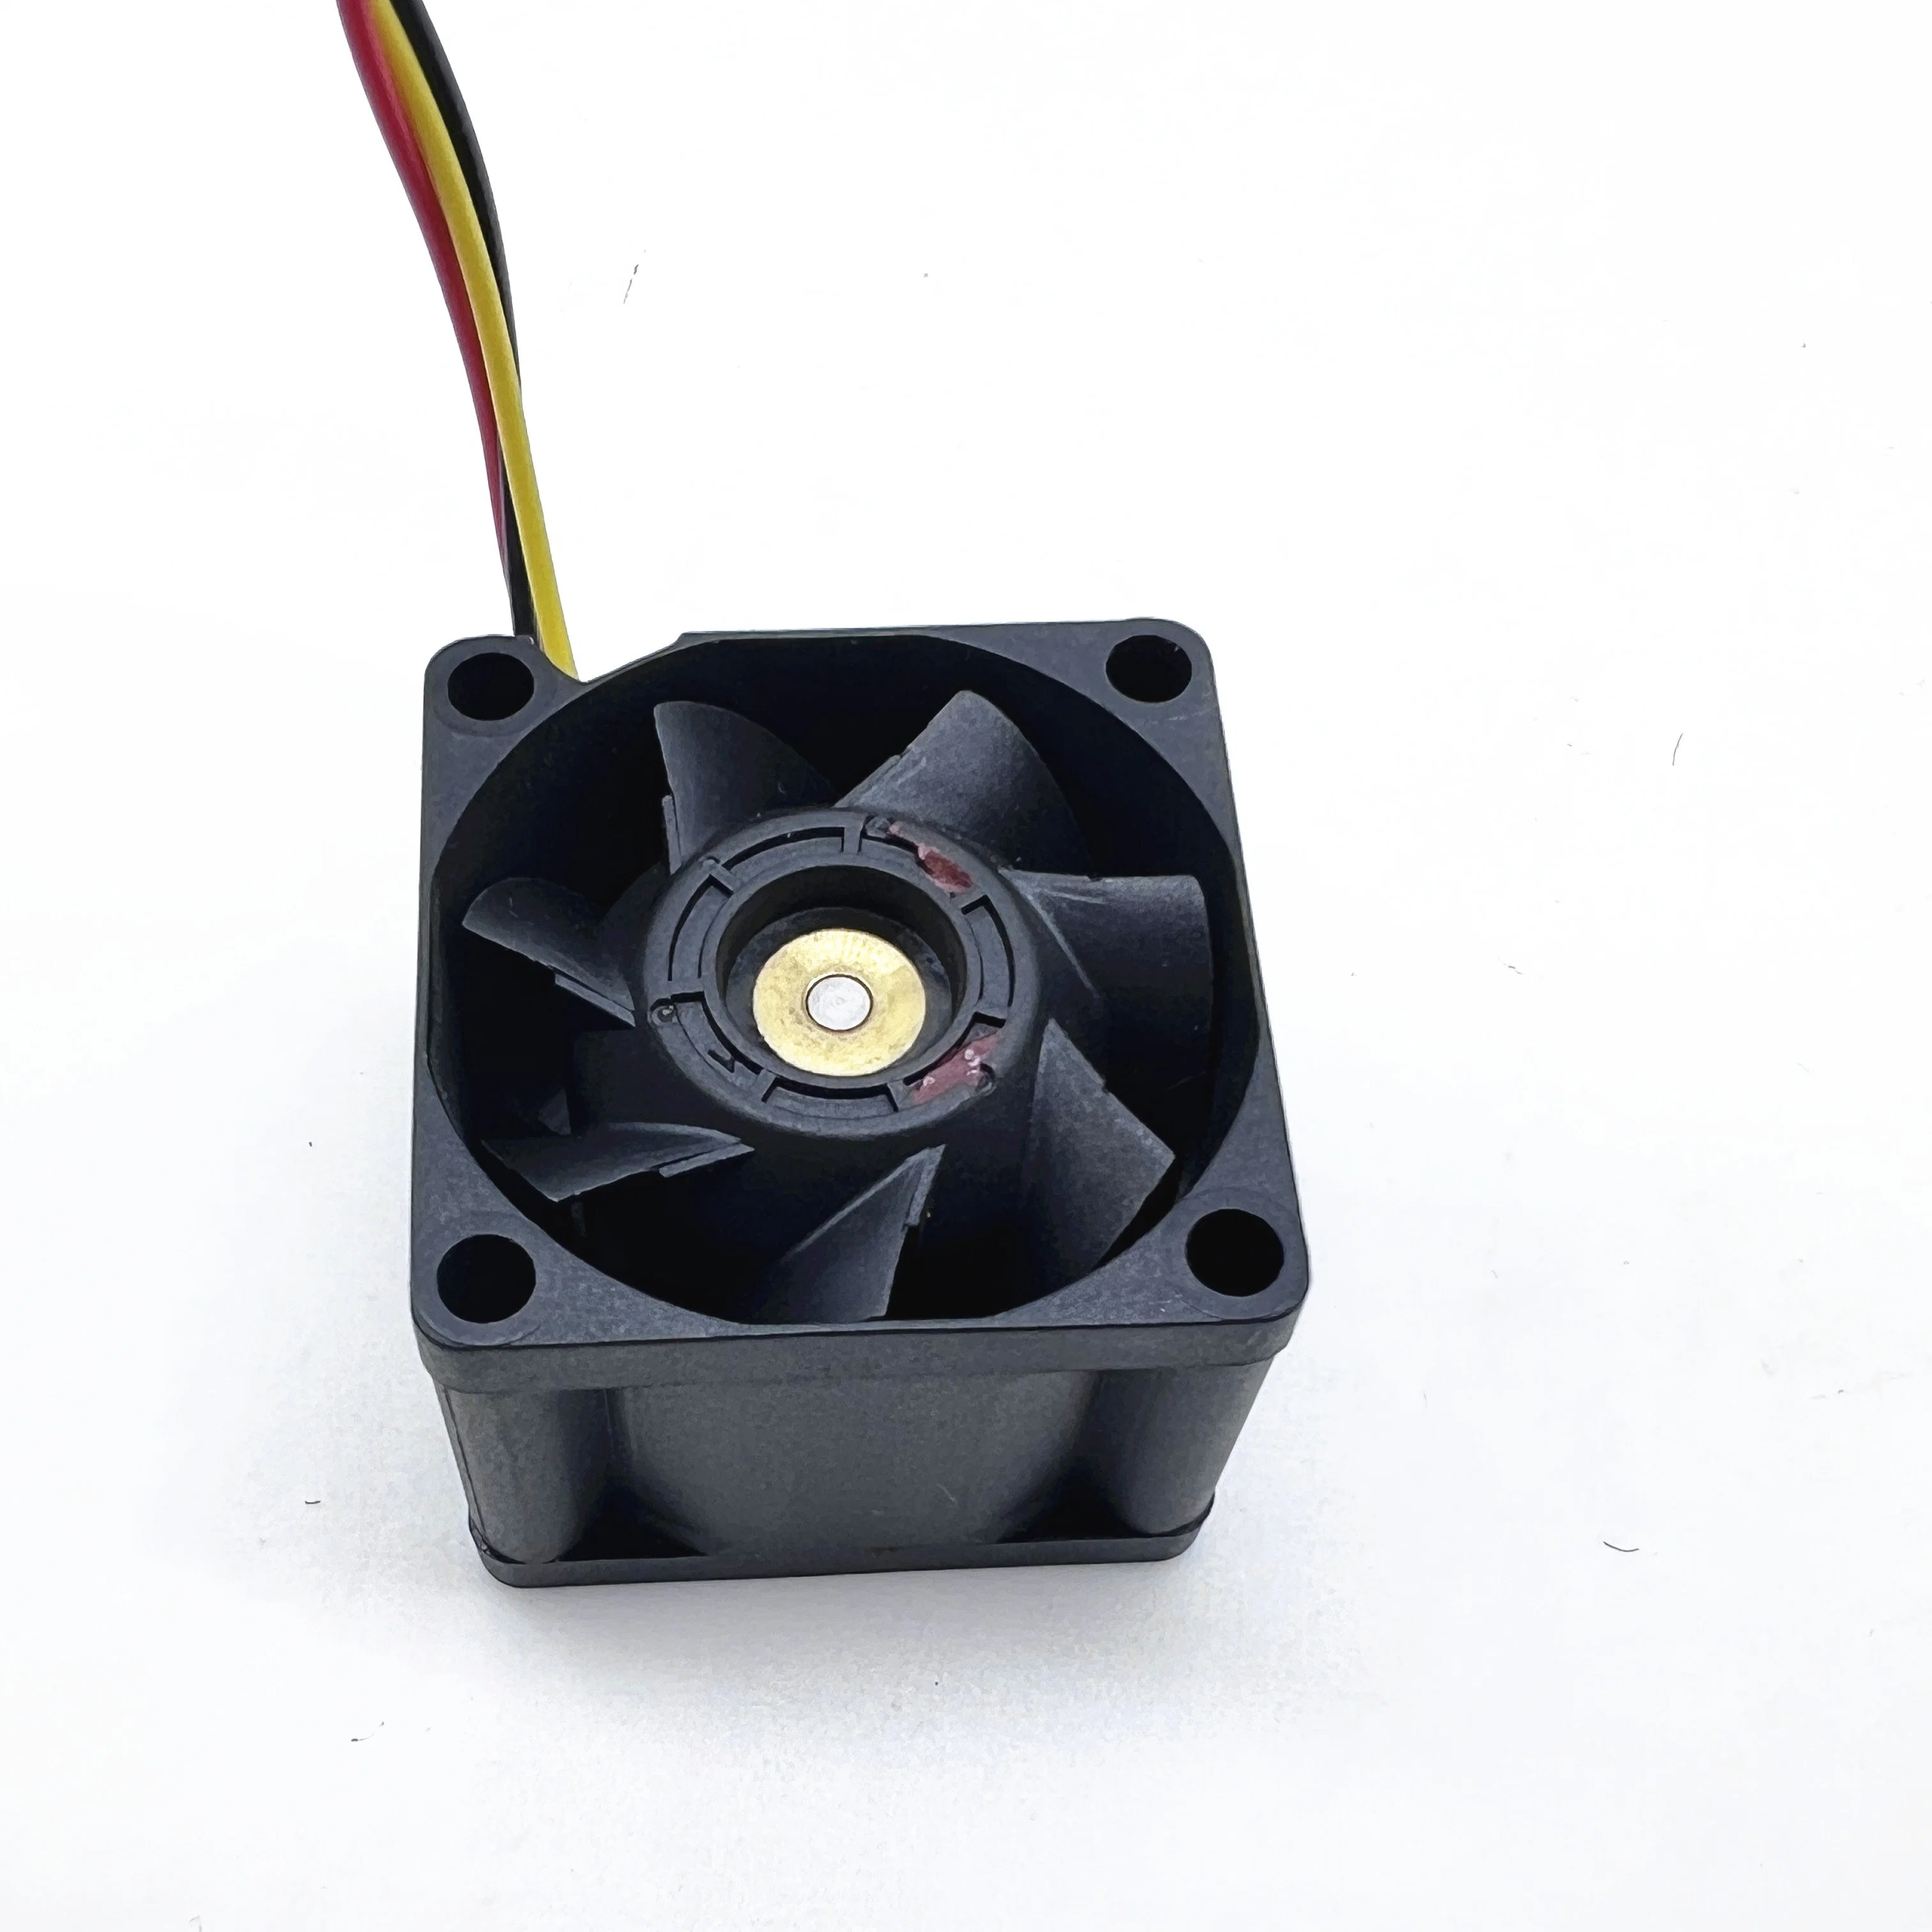 SANYO 9gv3612p3j03 36mm DC Motor Fan 19000rpm 36*36*28mm Square Axial Fan with High Pressure